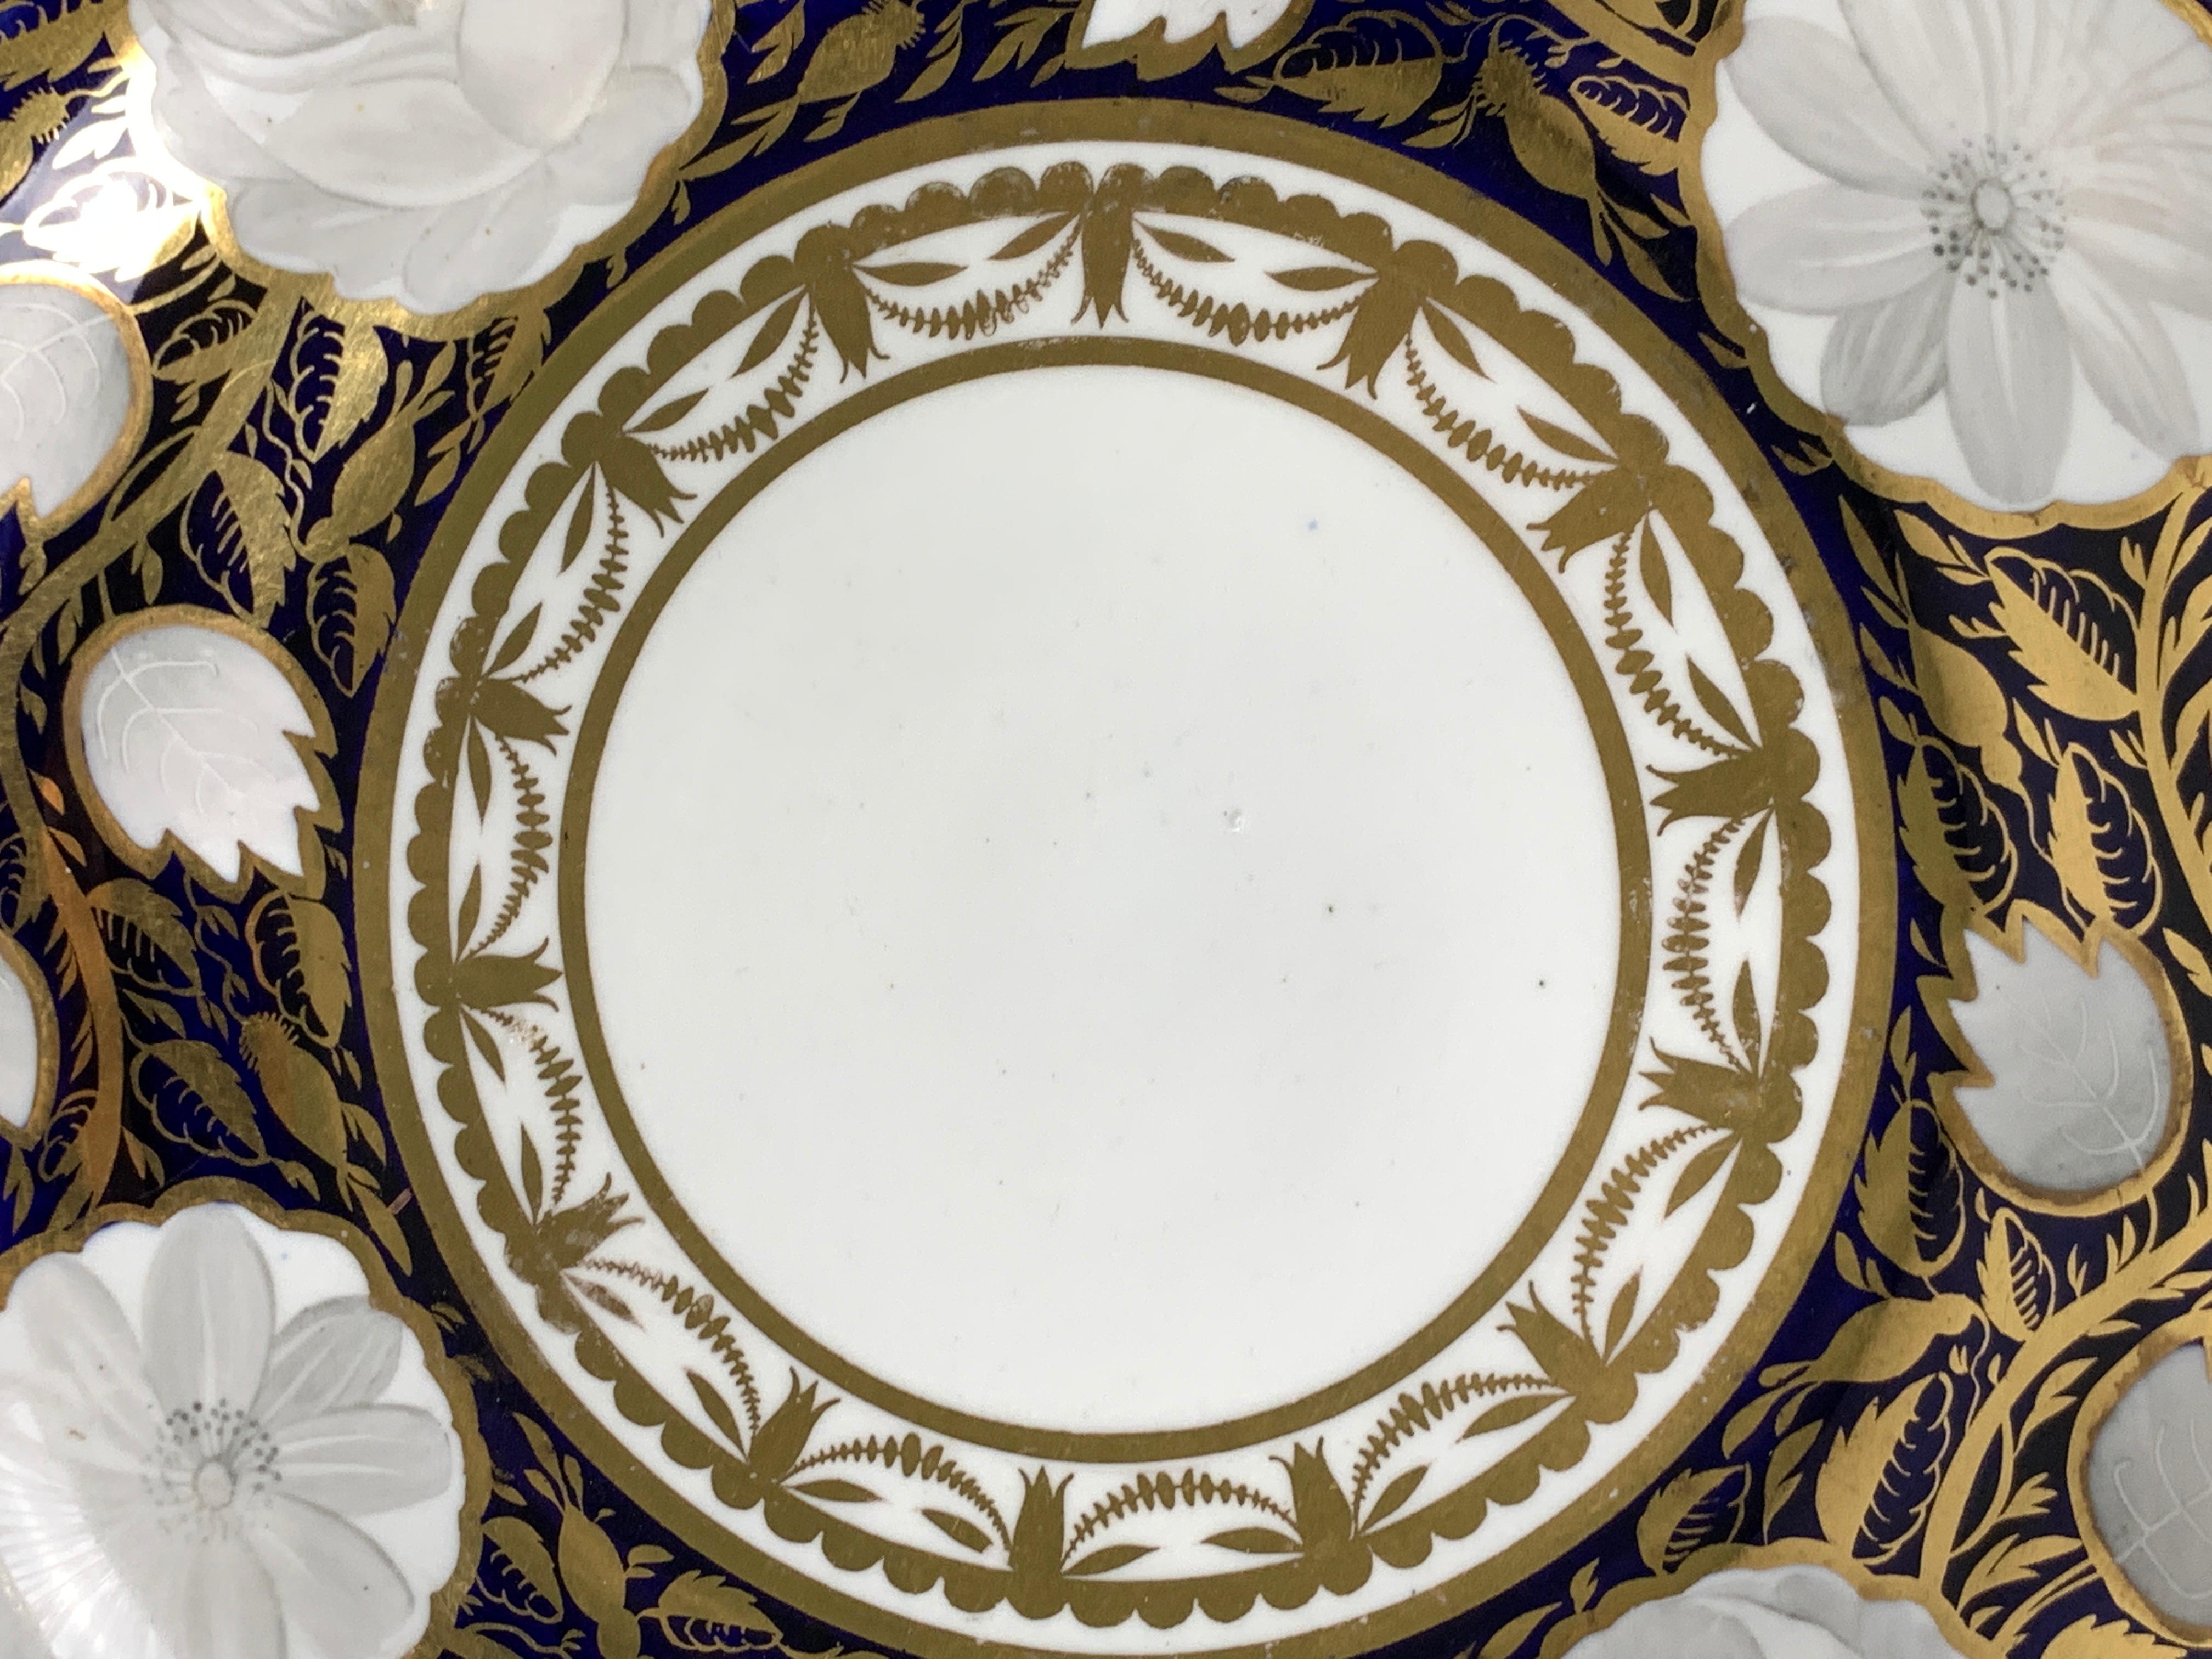 19th Century Blue and White and Gold Dish Made in England by Spode, Circa 1820